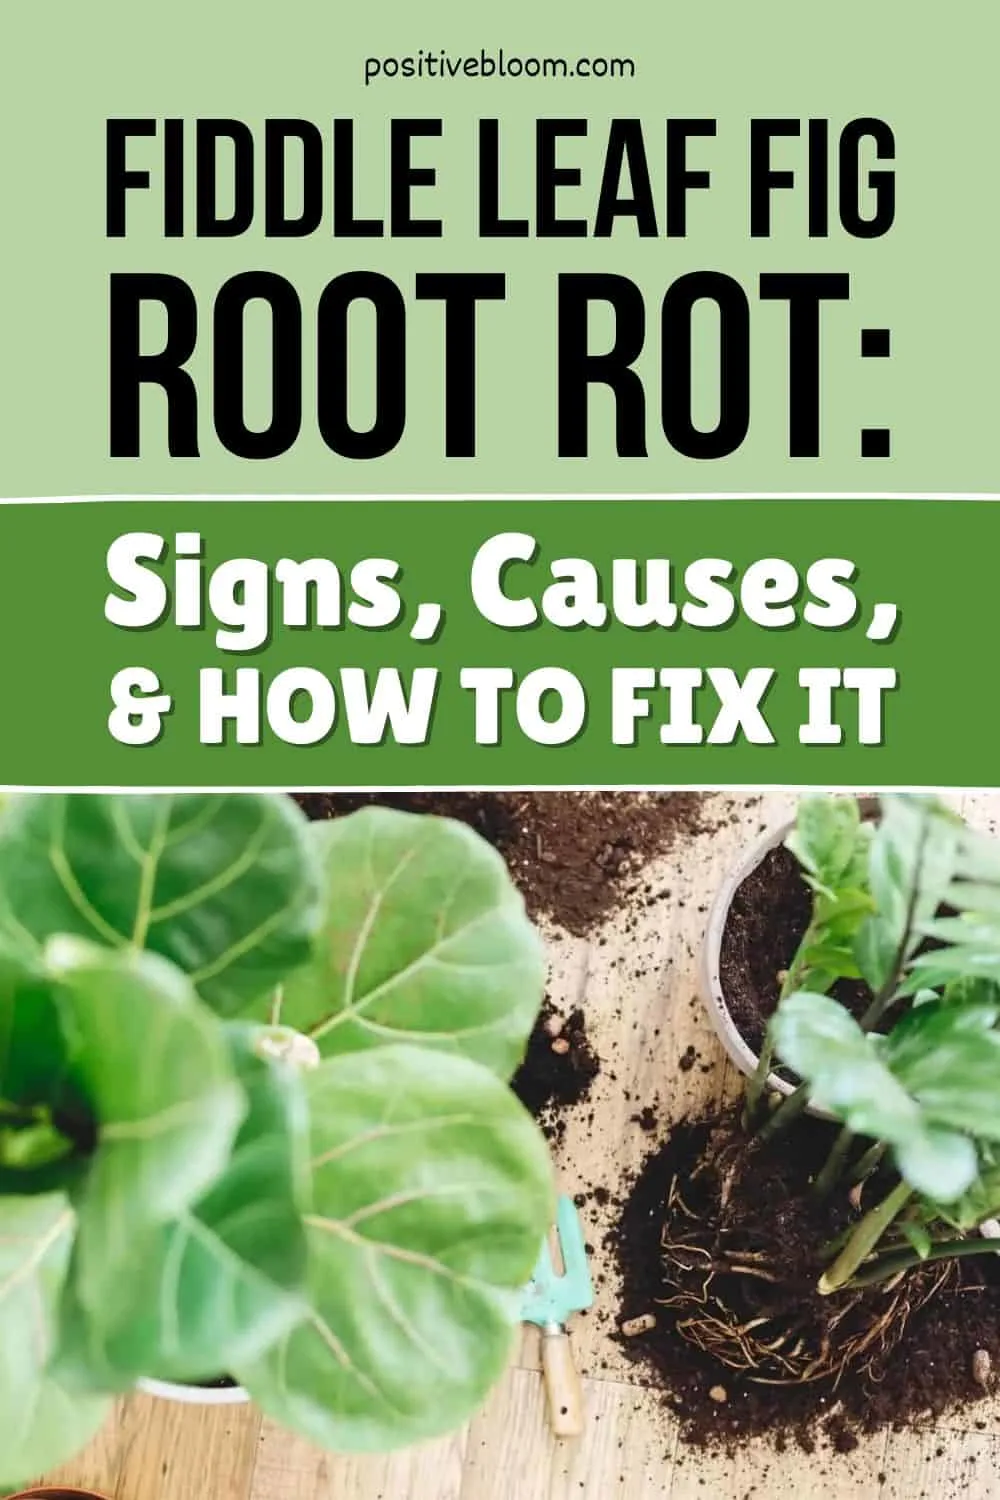 Fiddle Leaf Fig Root Rot Signs, Causes, & How To Fix It Pinterest